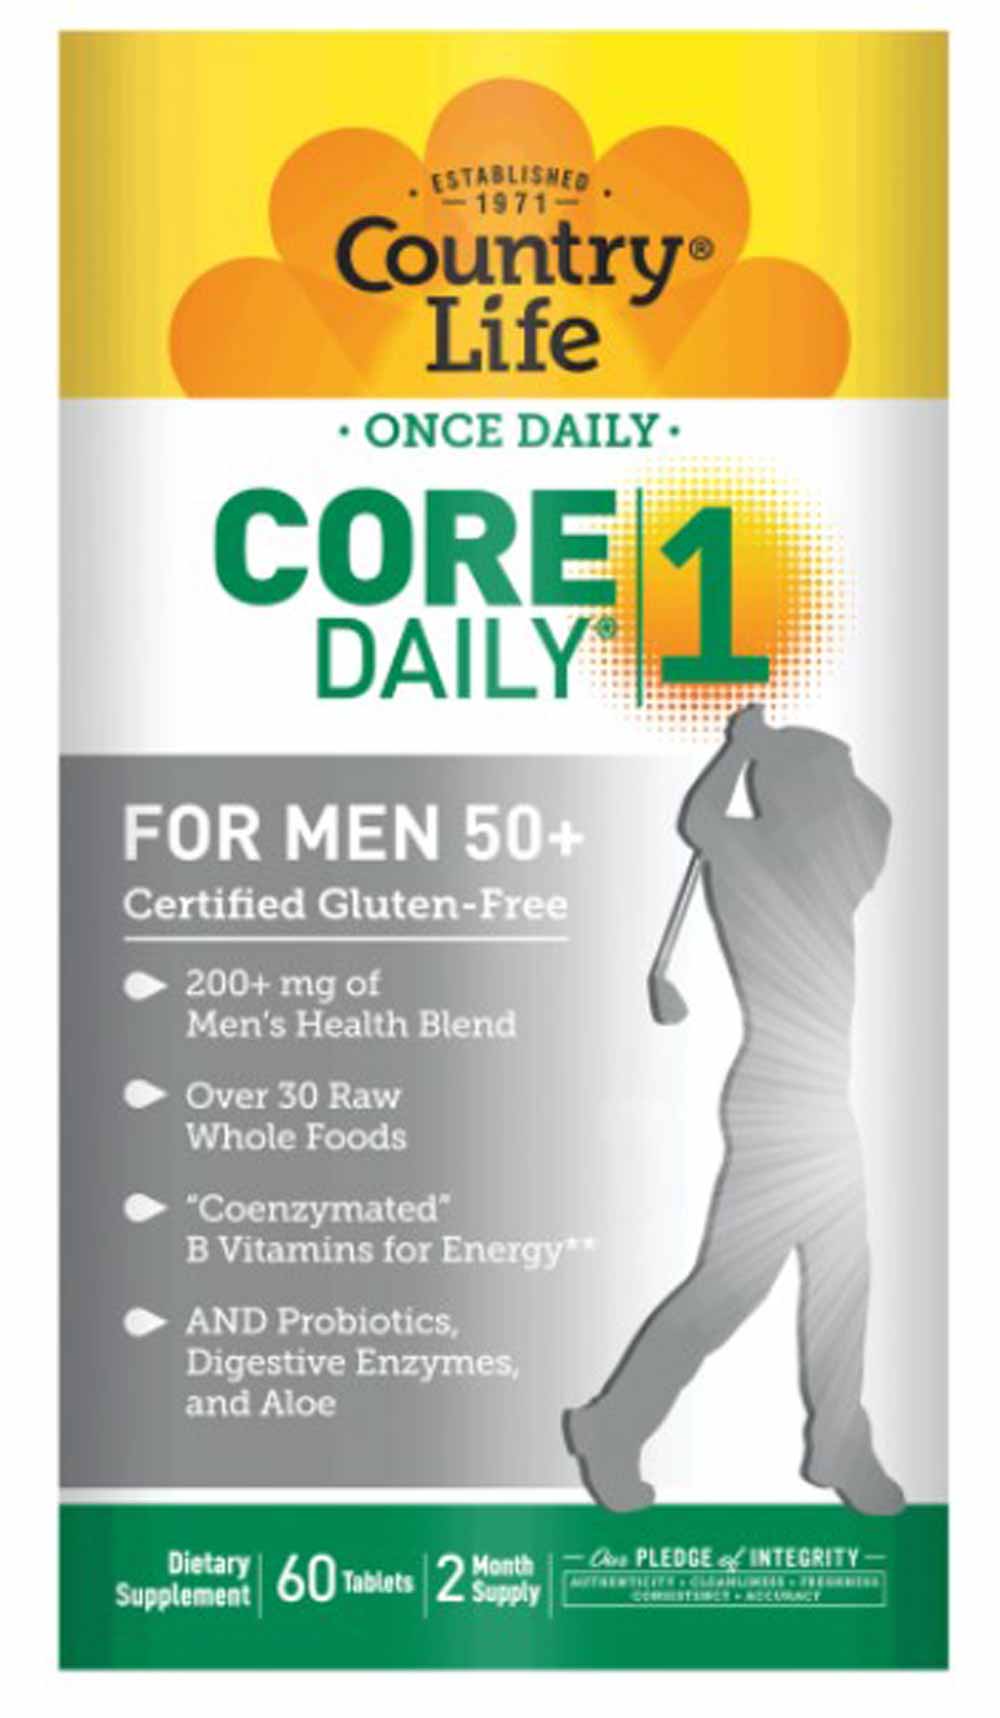 Country Life Core Daily 1 Multivitamin For Men 50+